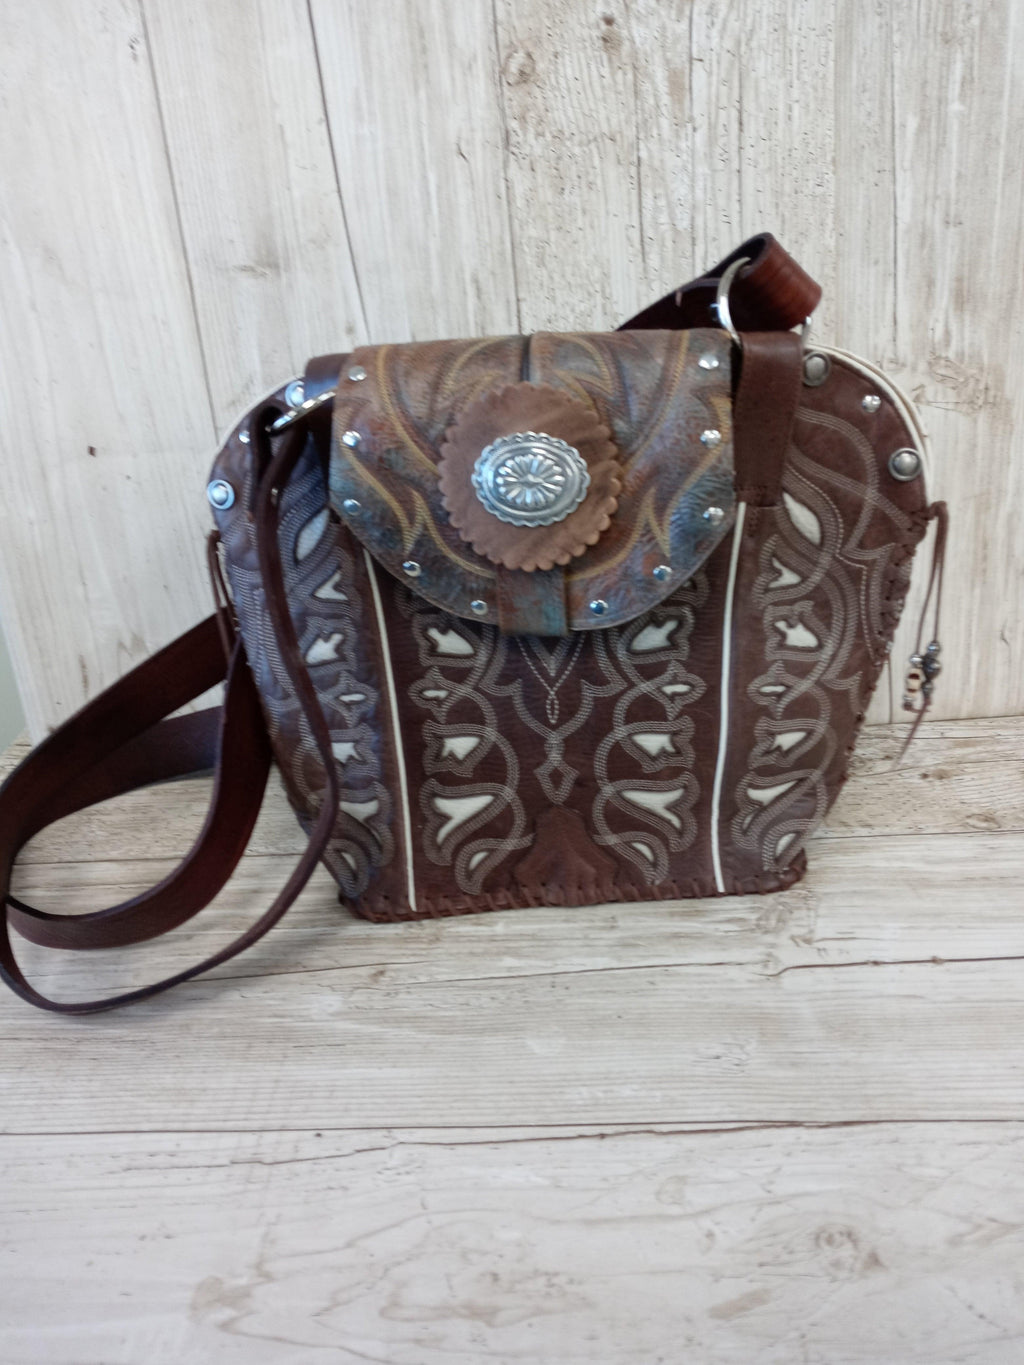 Cowboy Boot Purse - Western Leather Purse – Handmade Leather Purse - DB302 cowboy boot purses, western fringe purse, handmade leather purses, boot purse, handmade western purse, custom leather handbags Chris Thompson Bags